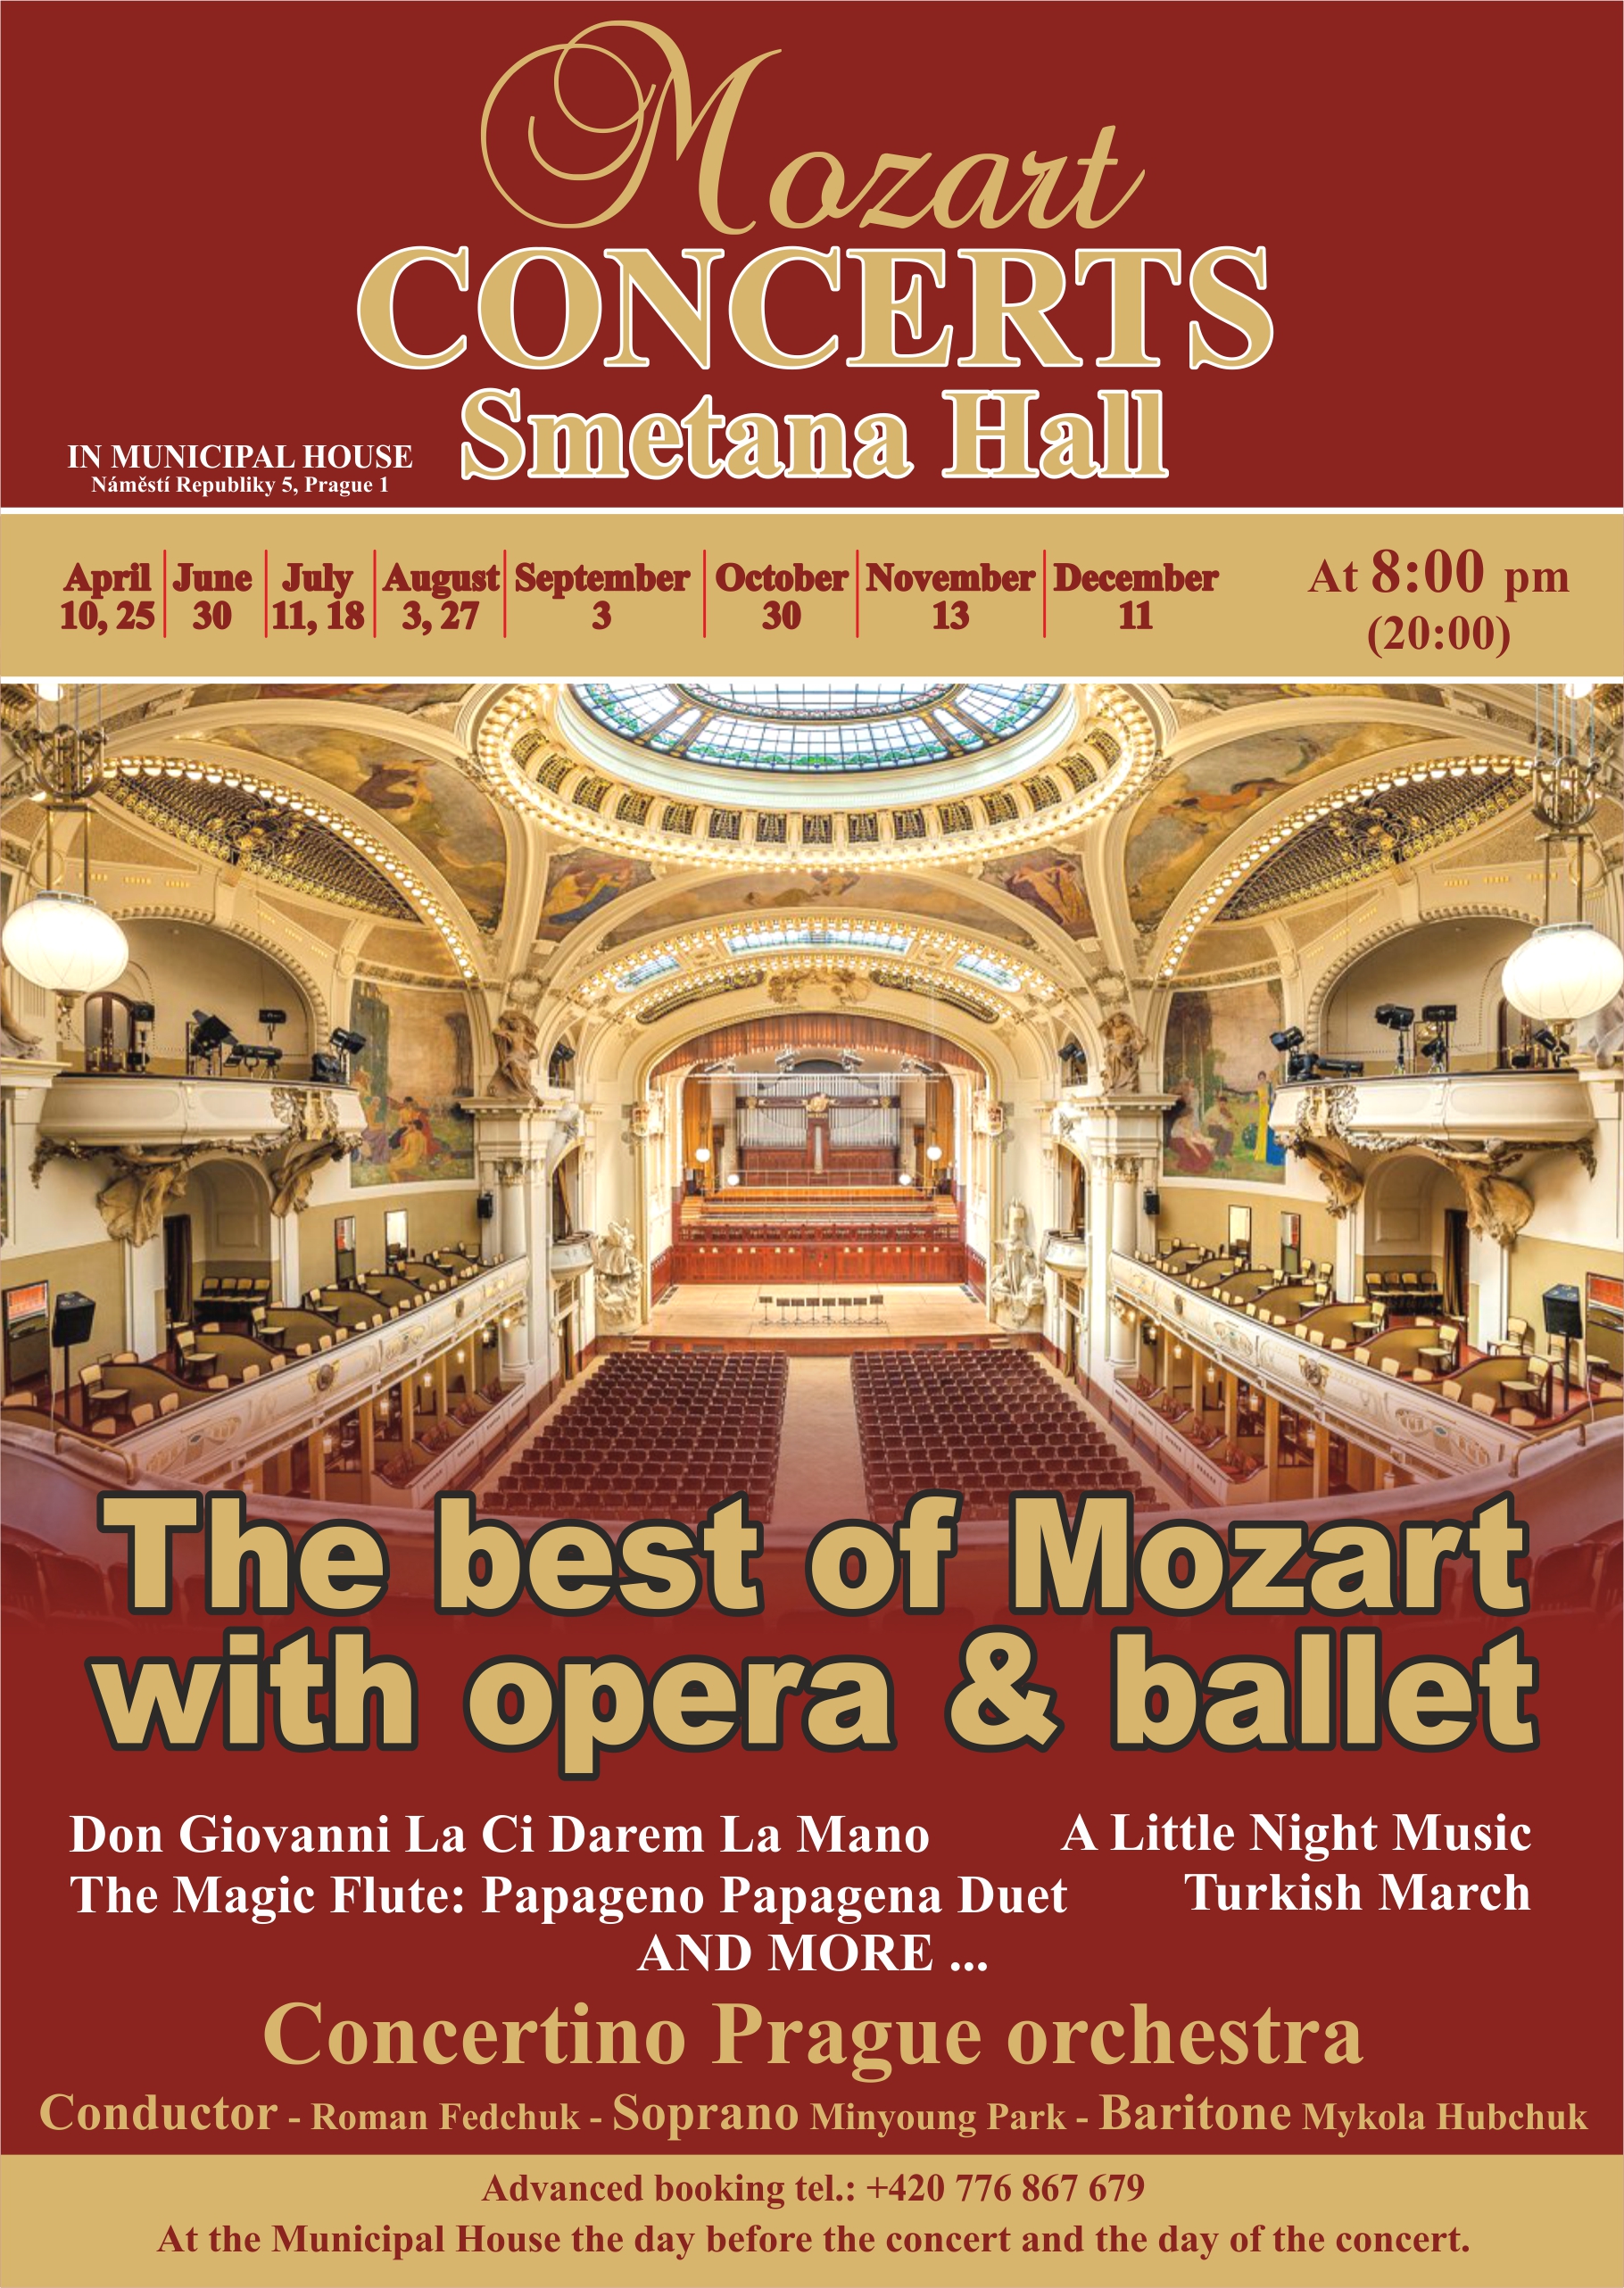 The best of Mozart with opera & ballet